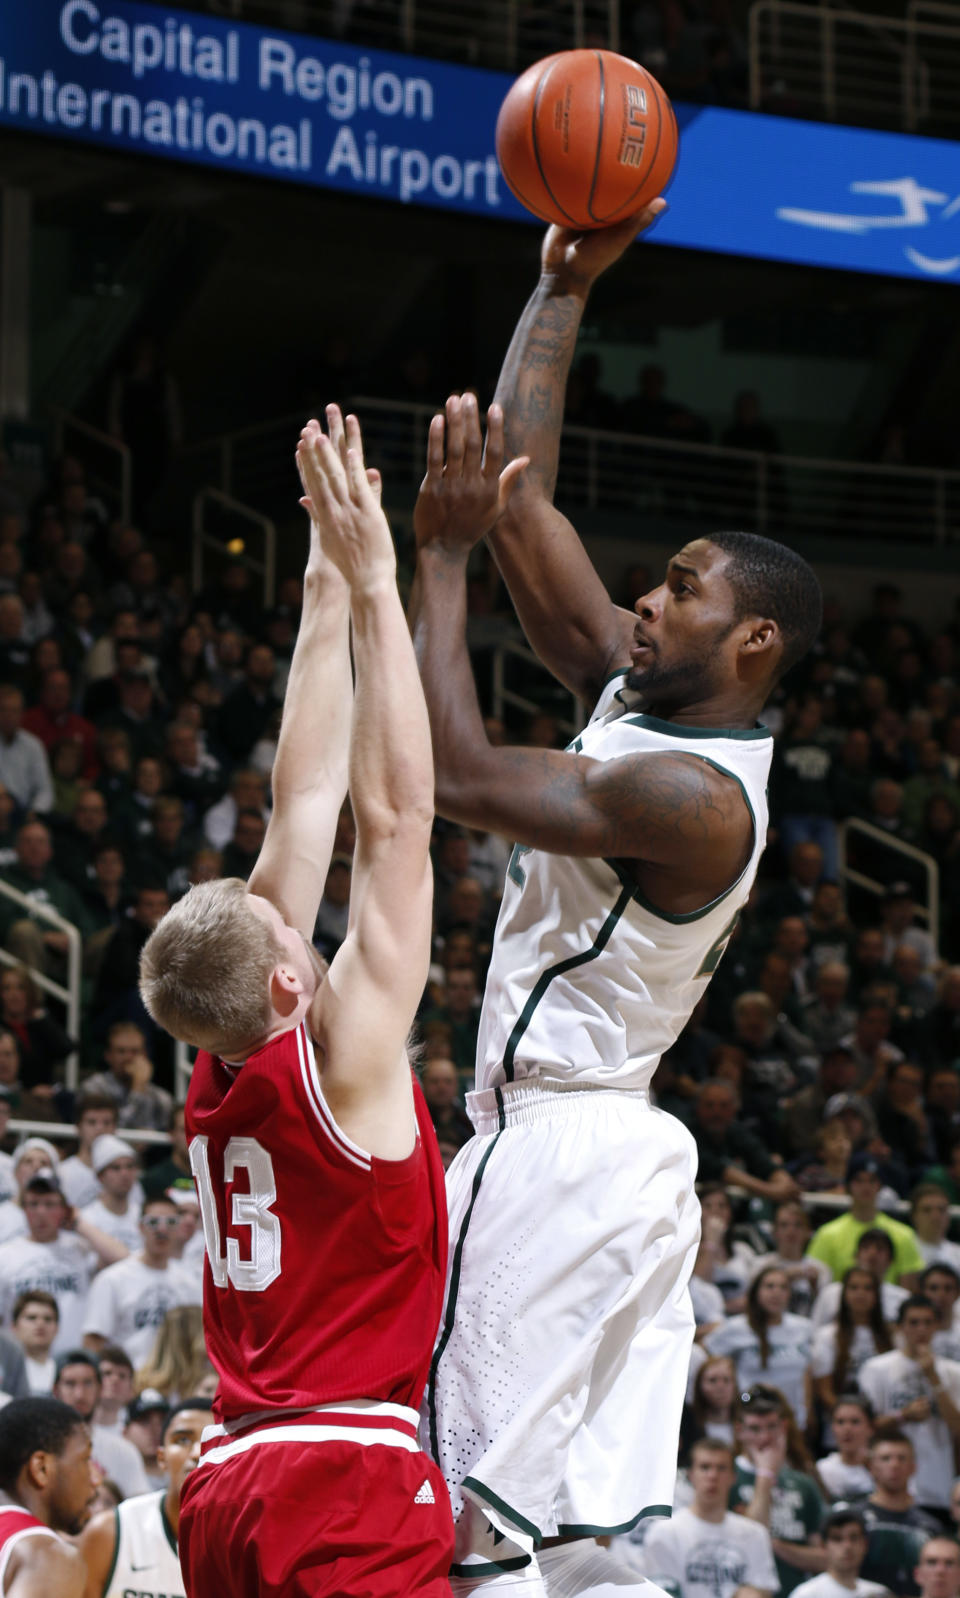 Michigan State's Branden Dawson, right, shoots over Indiana's Austin Etherington (13) during the second half of an NCAA college basketball game, Tuesday, Jan. 21, 2014, in East Lansing, Mich. Michigan State won 71-66. (AP Photo/Al Goldis)